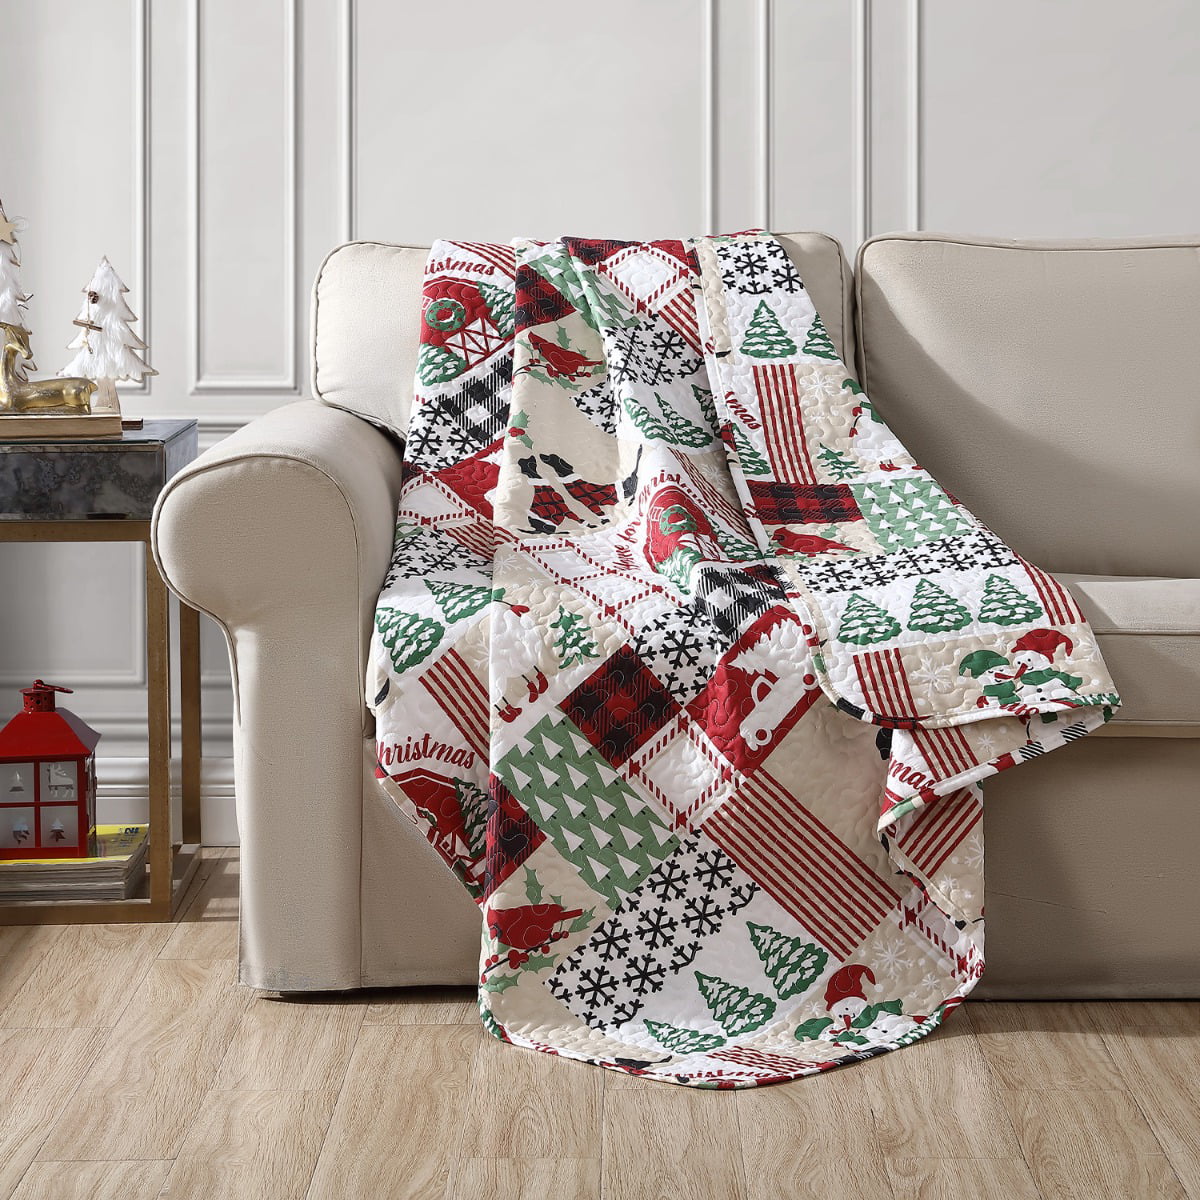 50x 60,Green Soft and Lightweight Exclusivo Mezcla Microfiber Boho Patchwork Pattern Quilted Throw Blanket for Bed/Couch/Sofa